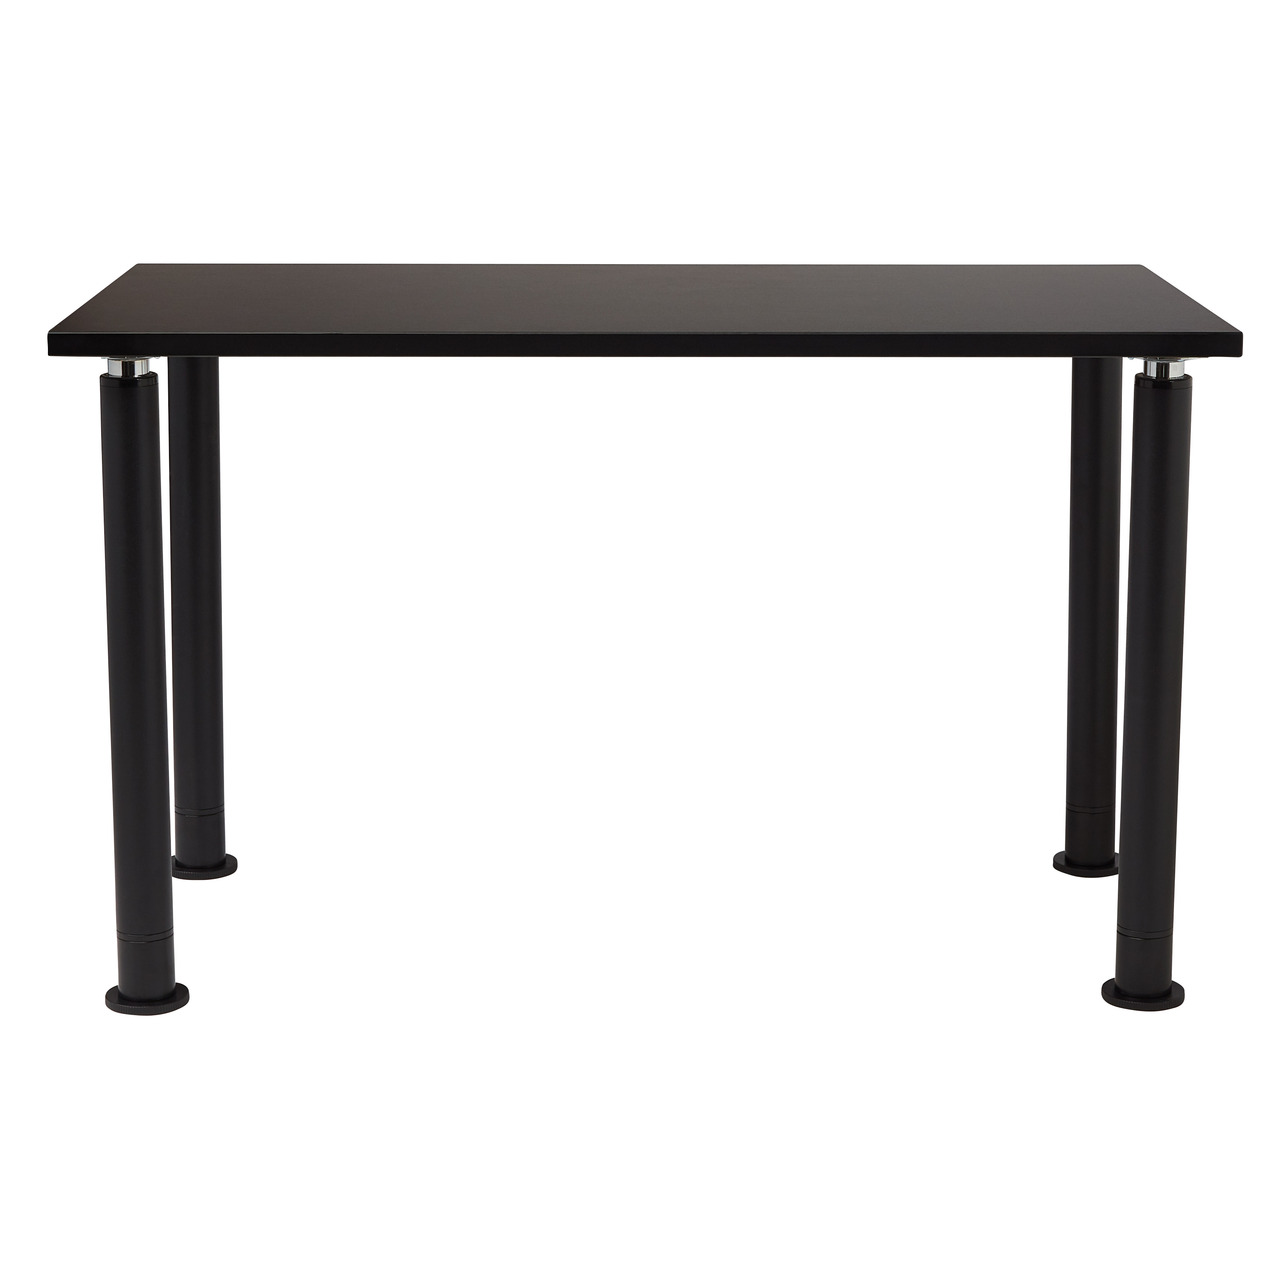 NPS Designer Science Table, 30"x60", Chemical Resistant Top - Black Top and Black Leg